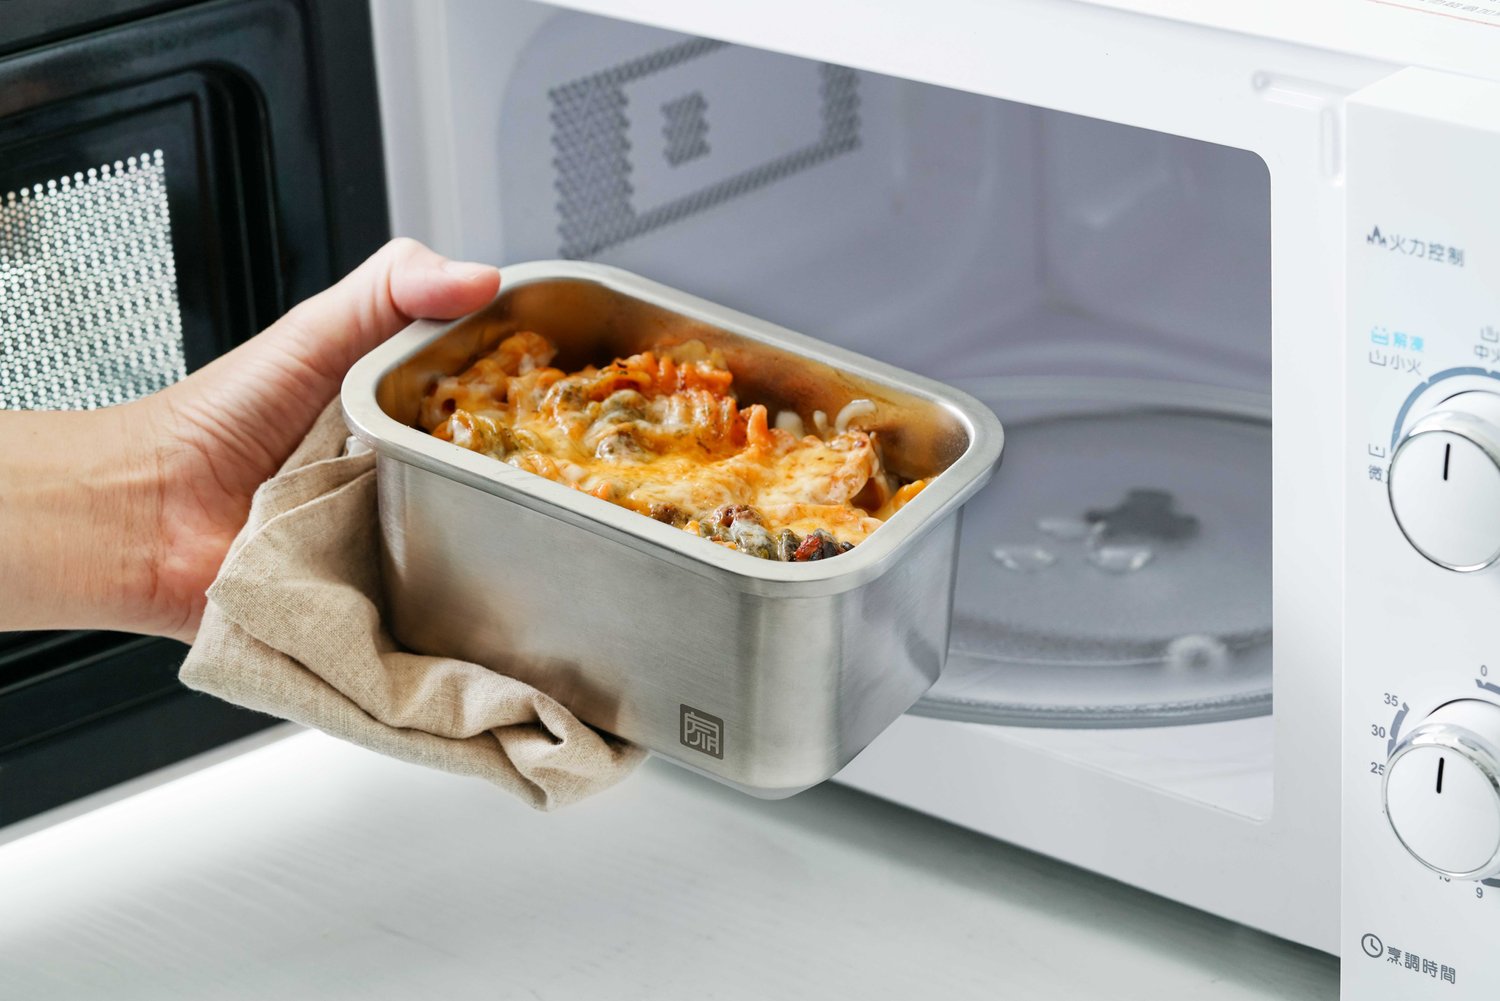 Microwave Safe Containers: A Business' Guide [VIDEO]